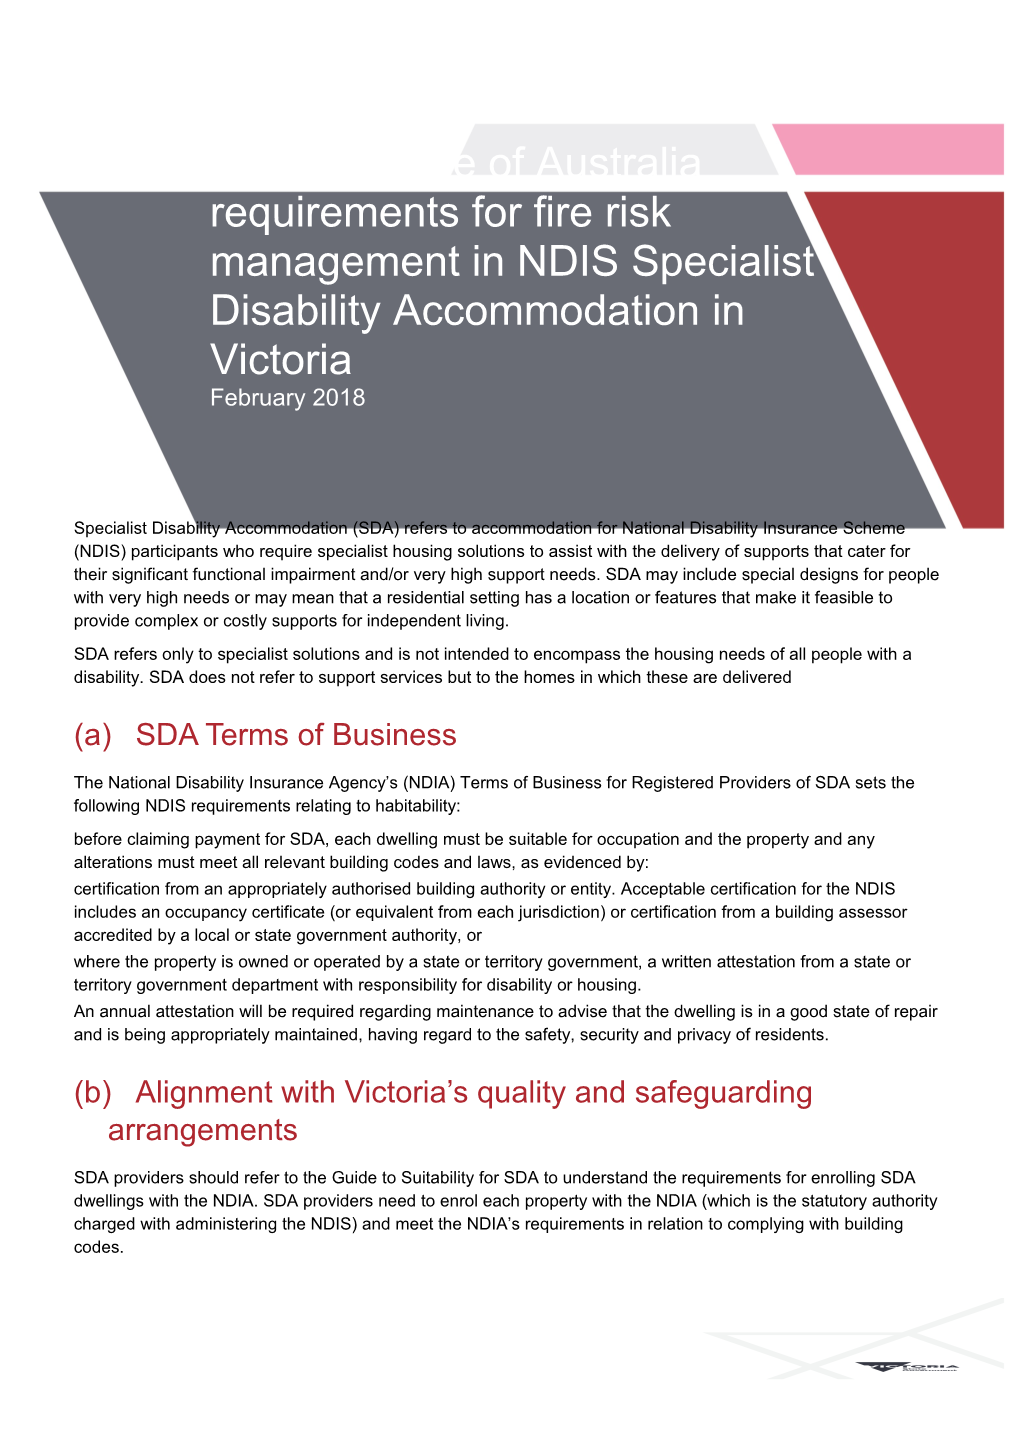 BCA Requirements for Fire Risk Management in NDIS SDA Victoria January 2018